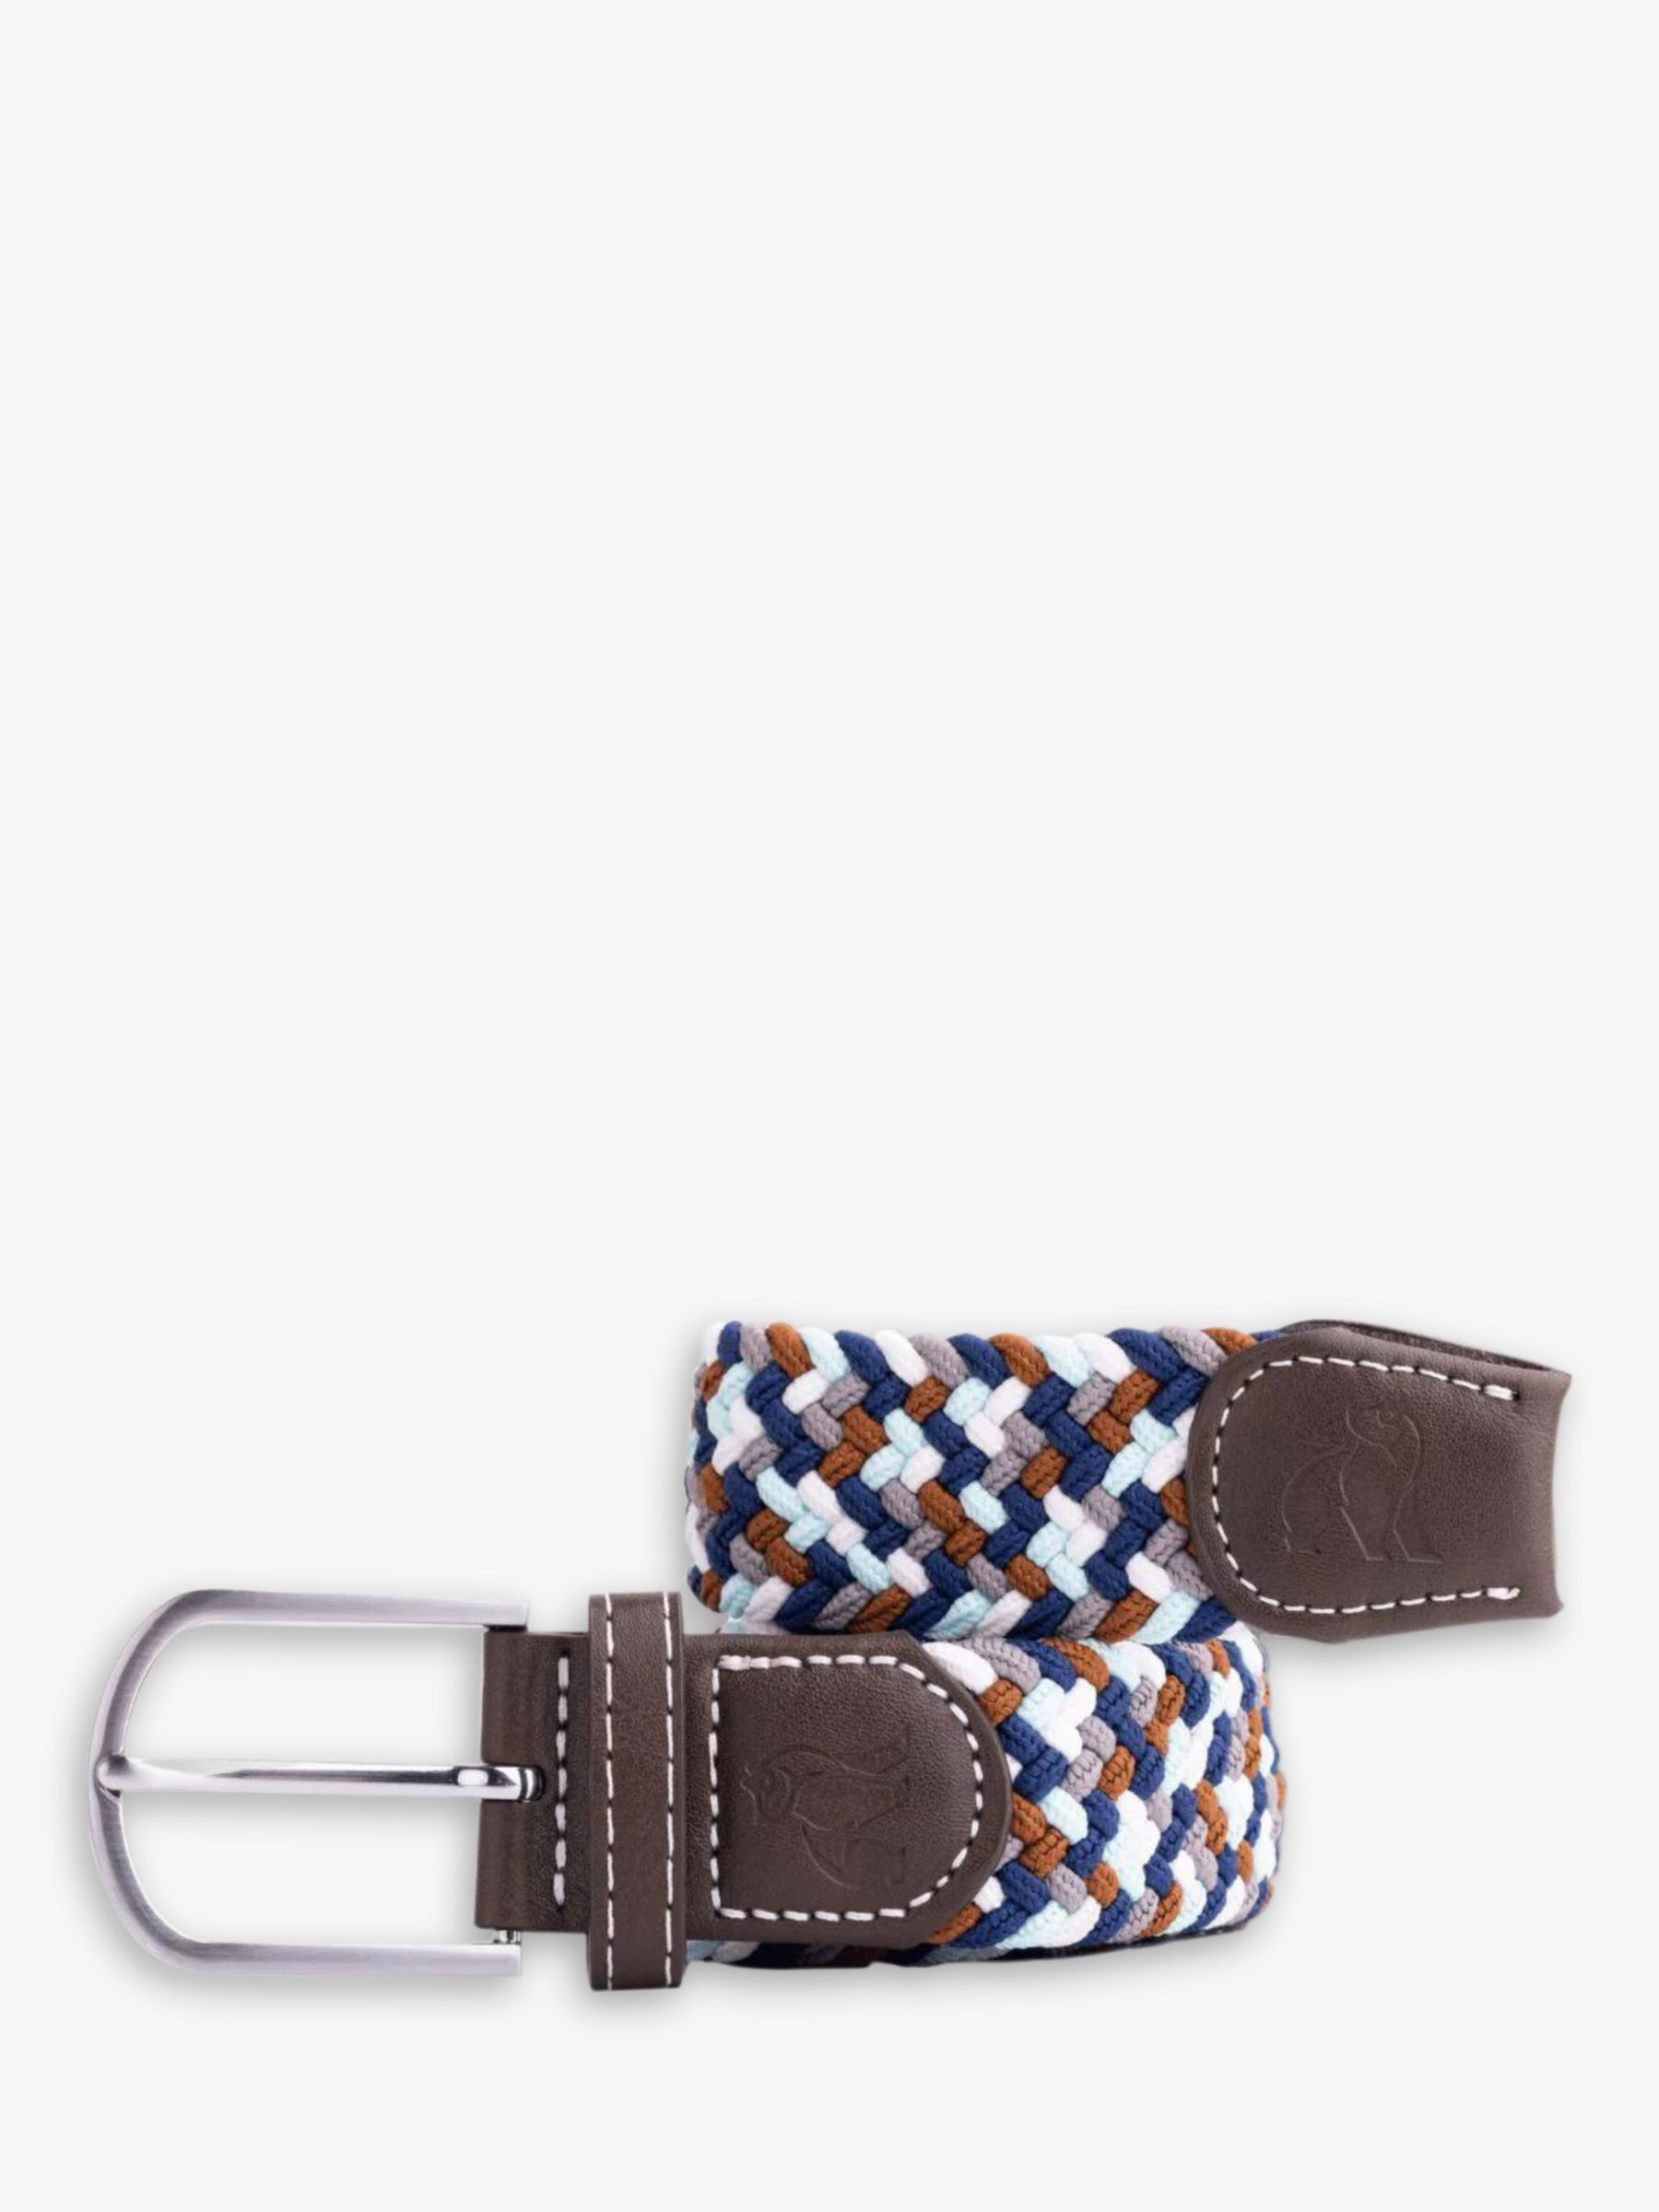 Swole Panda Abstract Recycled Woven Belt, Navy/Grey/Brown at John Lewis ...